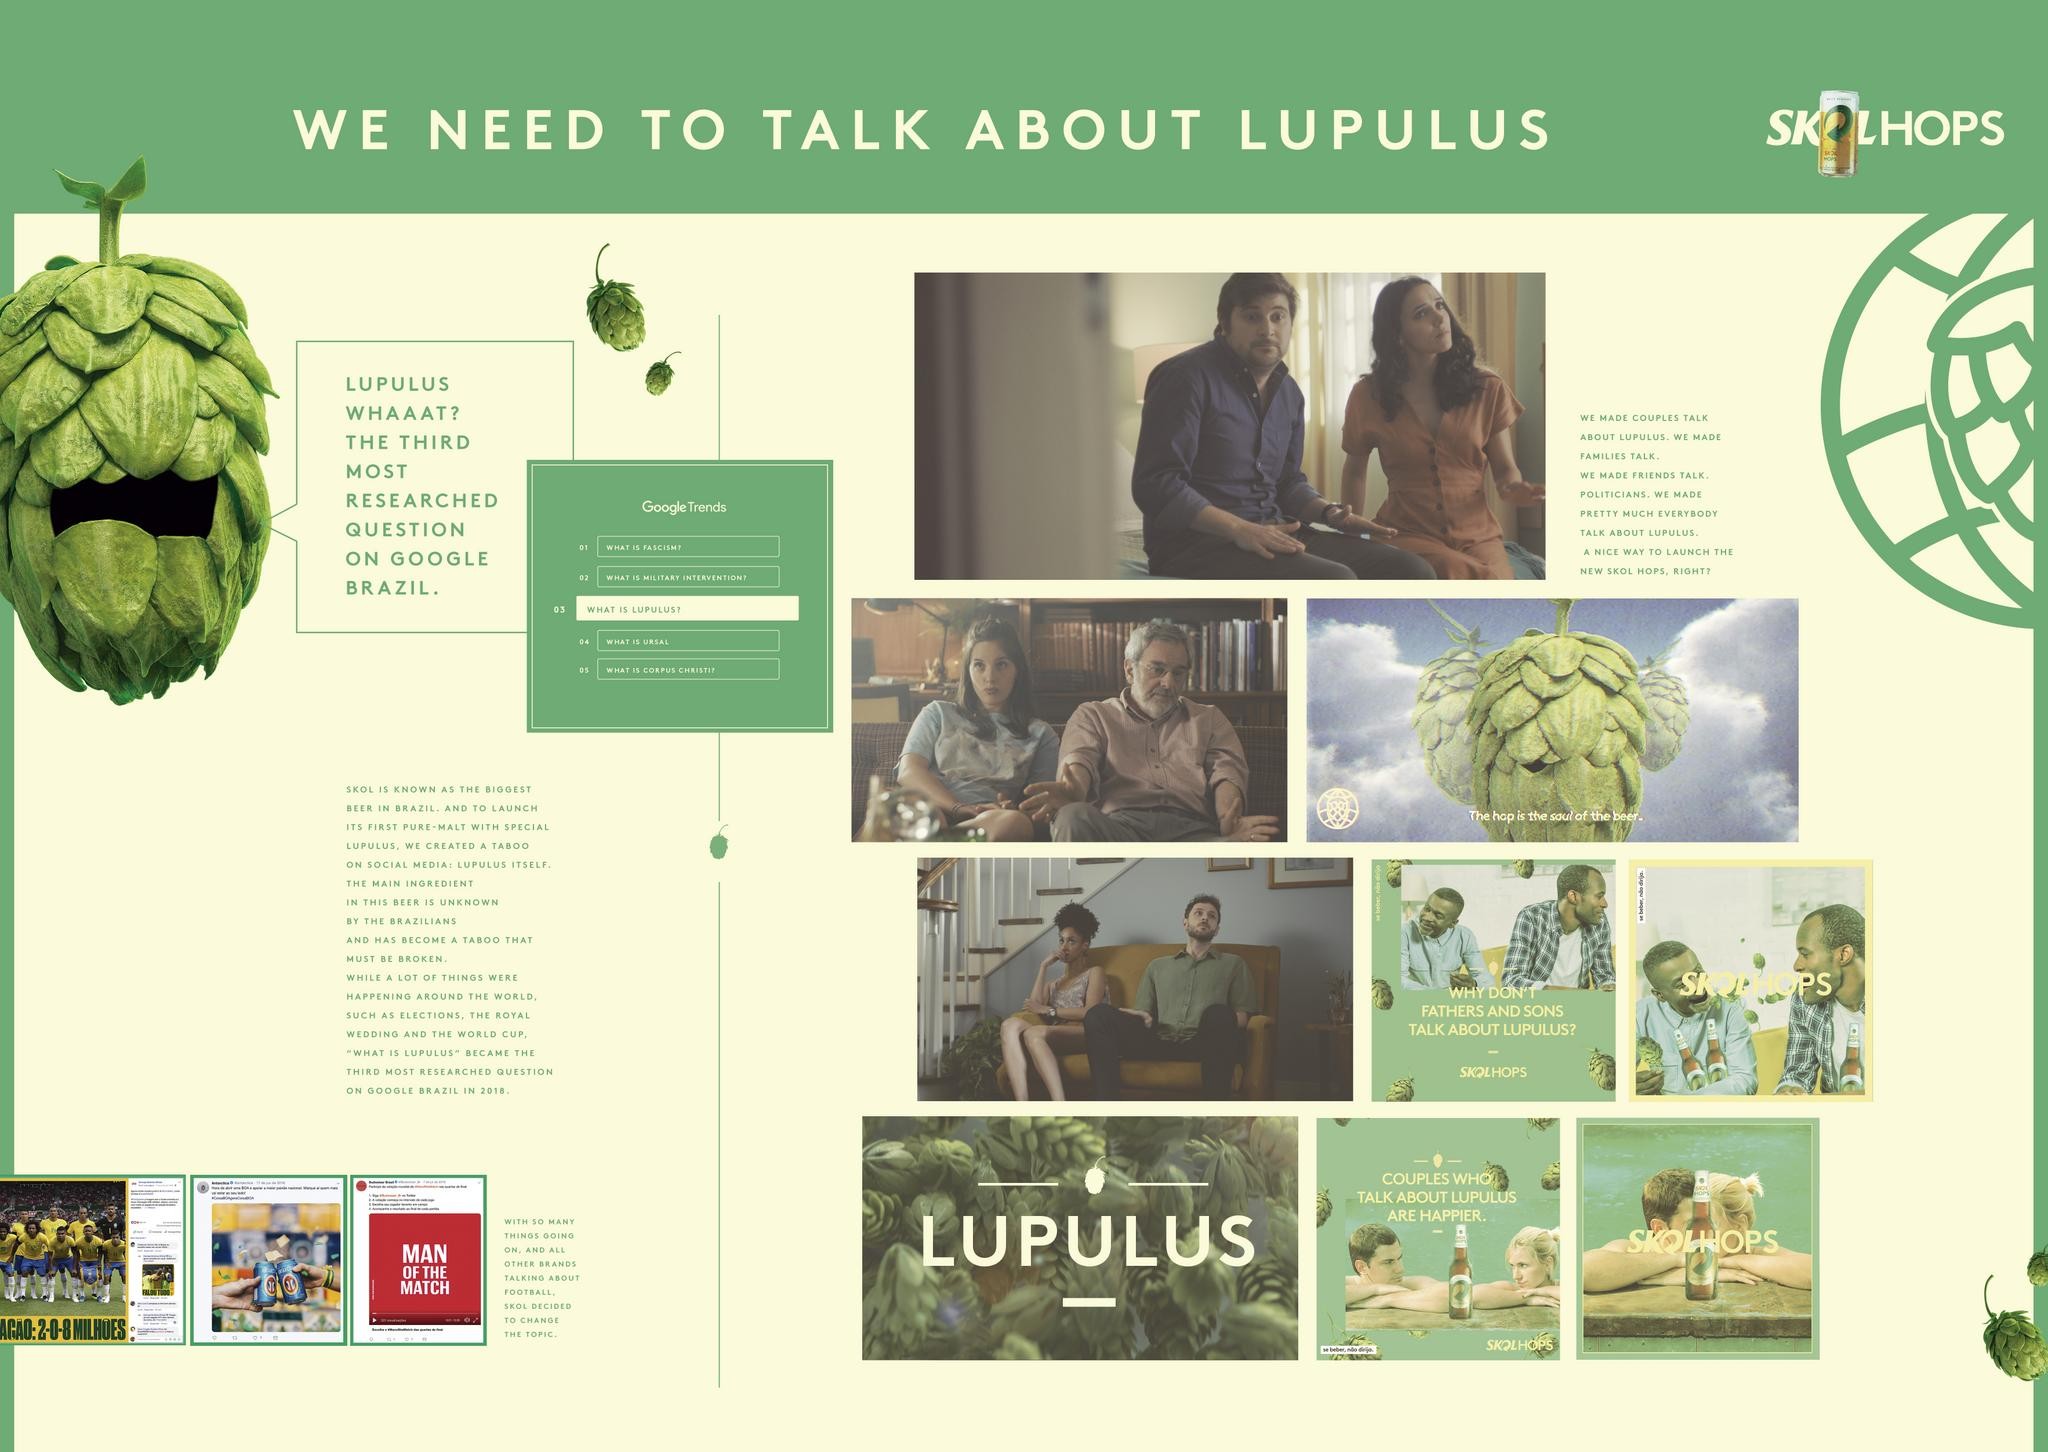 We Need to Talk About Lupulus